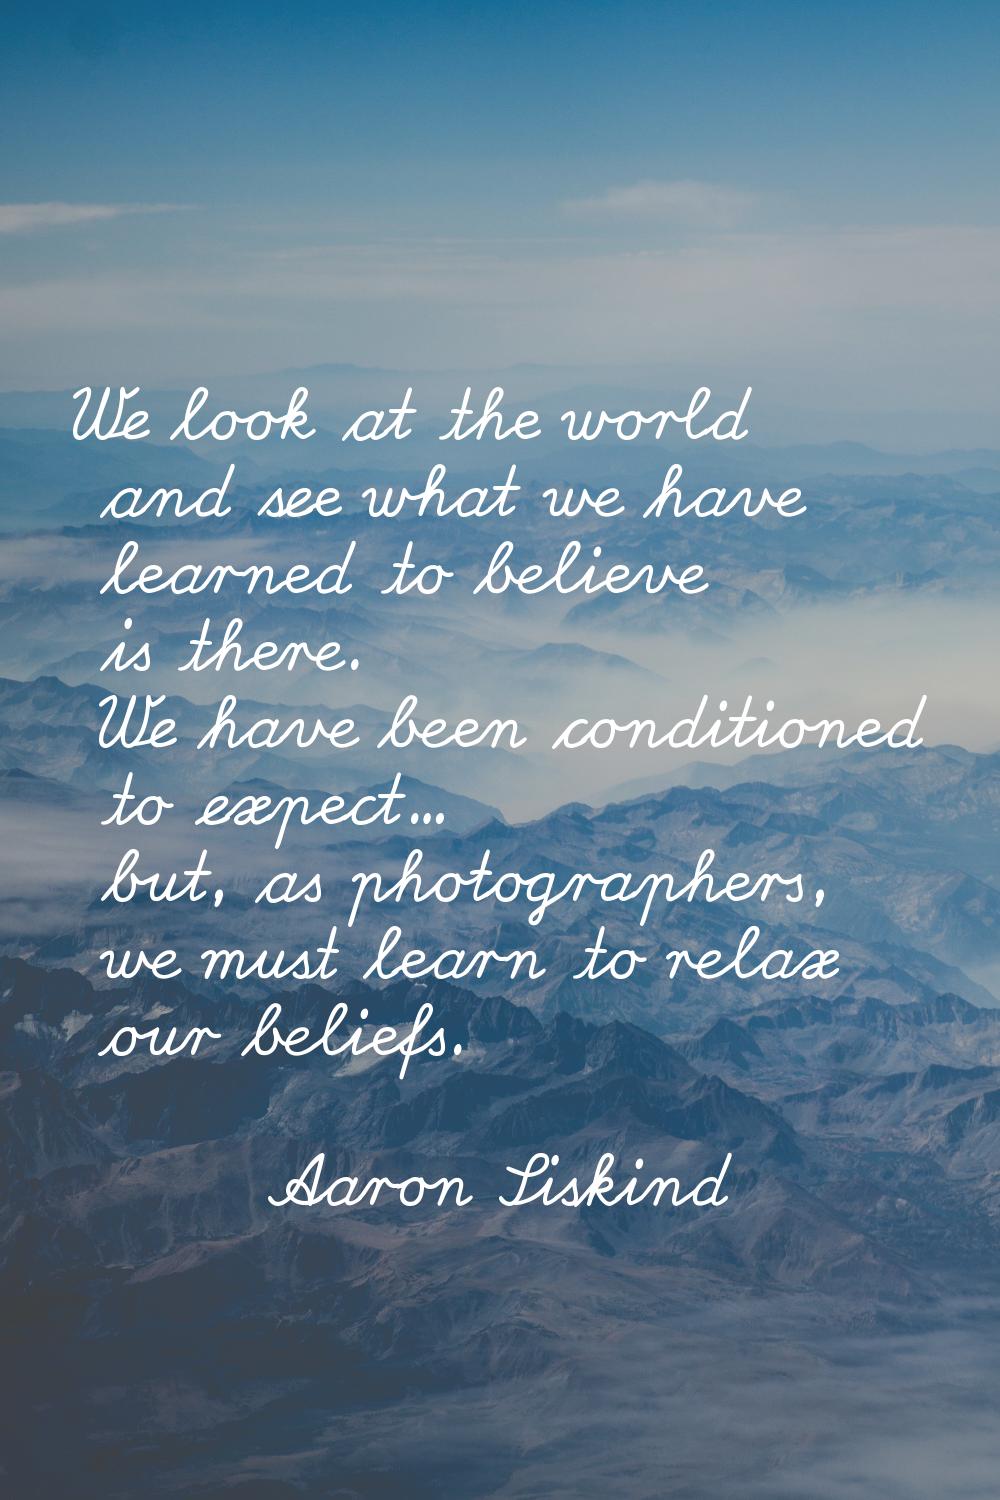 We look at the world and see what we have learned to believe is there. We have been conditioned to 